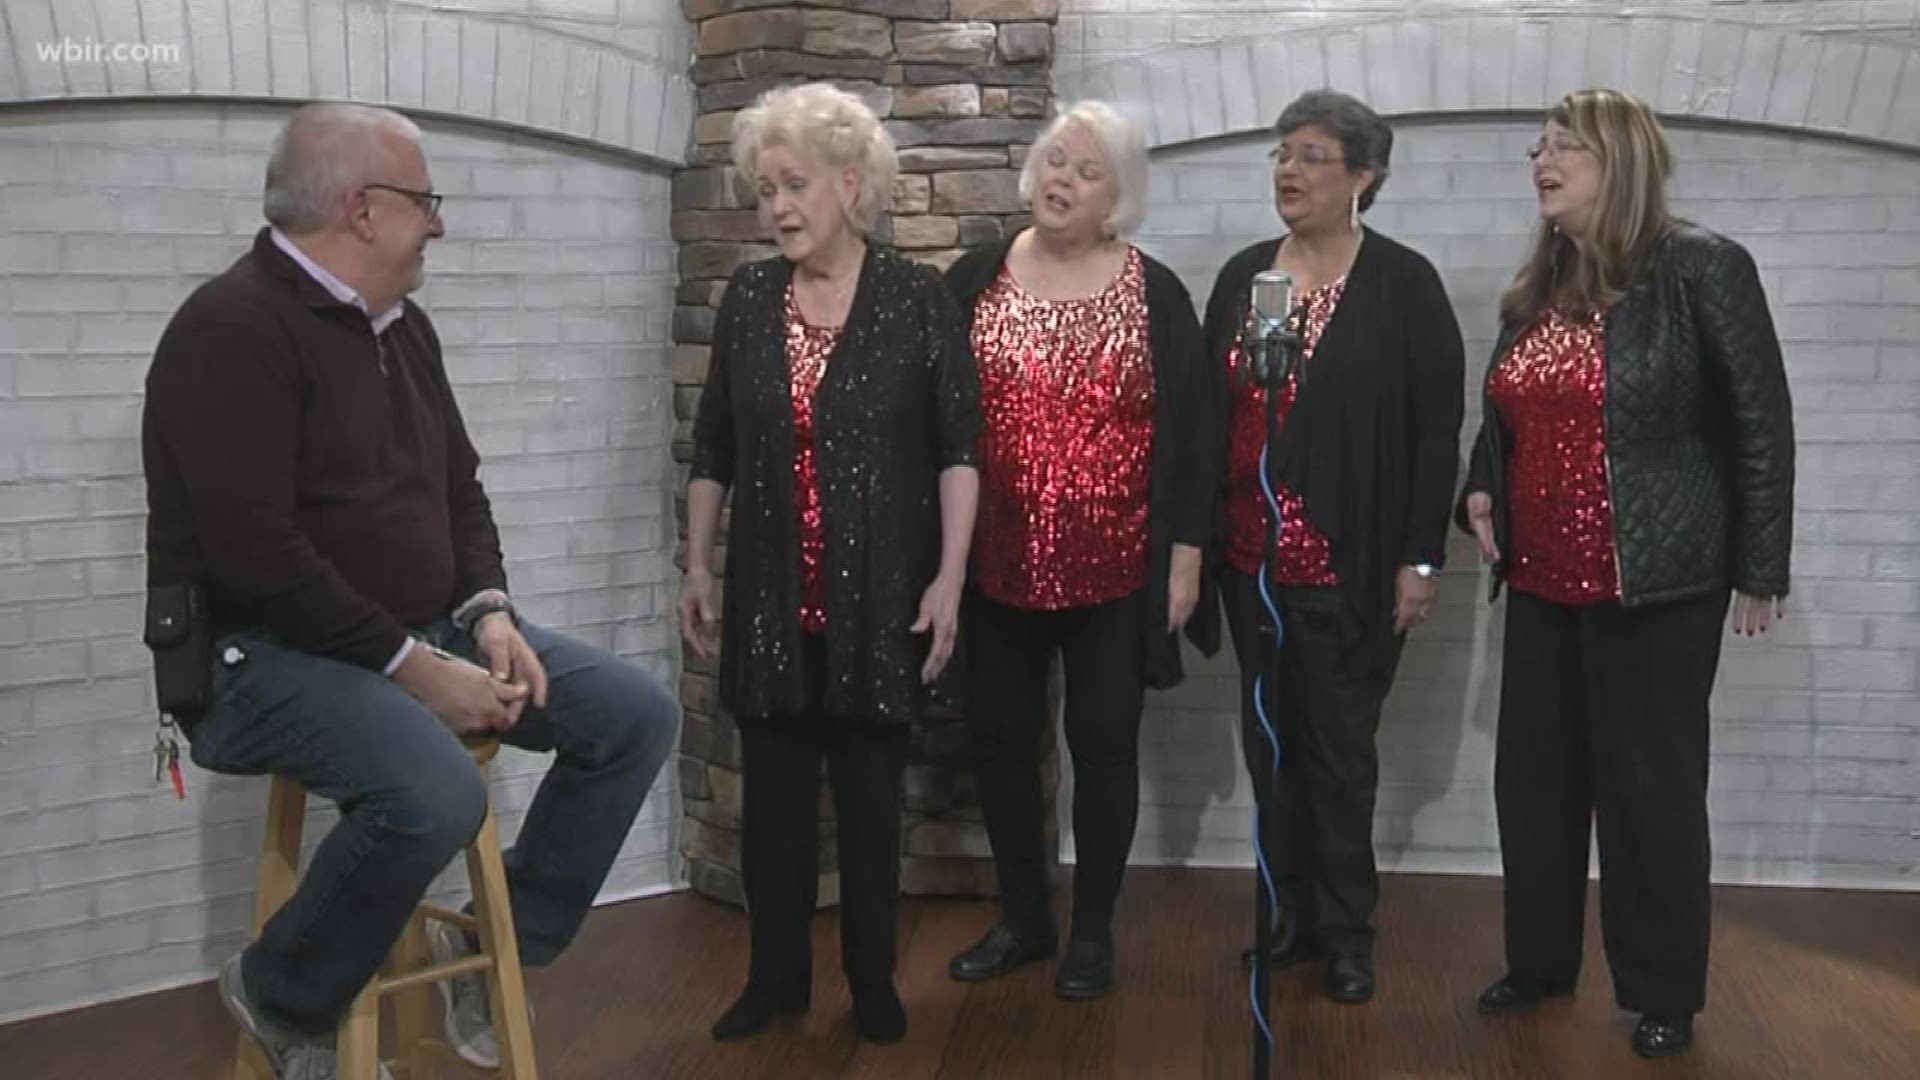 For information on K-town sound's Singing Valentines, visit ktownsound.org. Today the ladies are serenading Don-whose anniversary is coming up. Feb. 12, 2020-4pm.